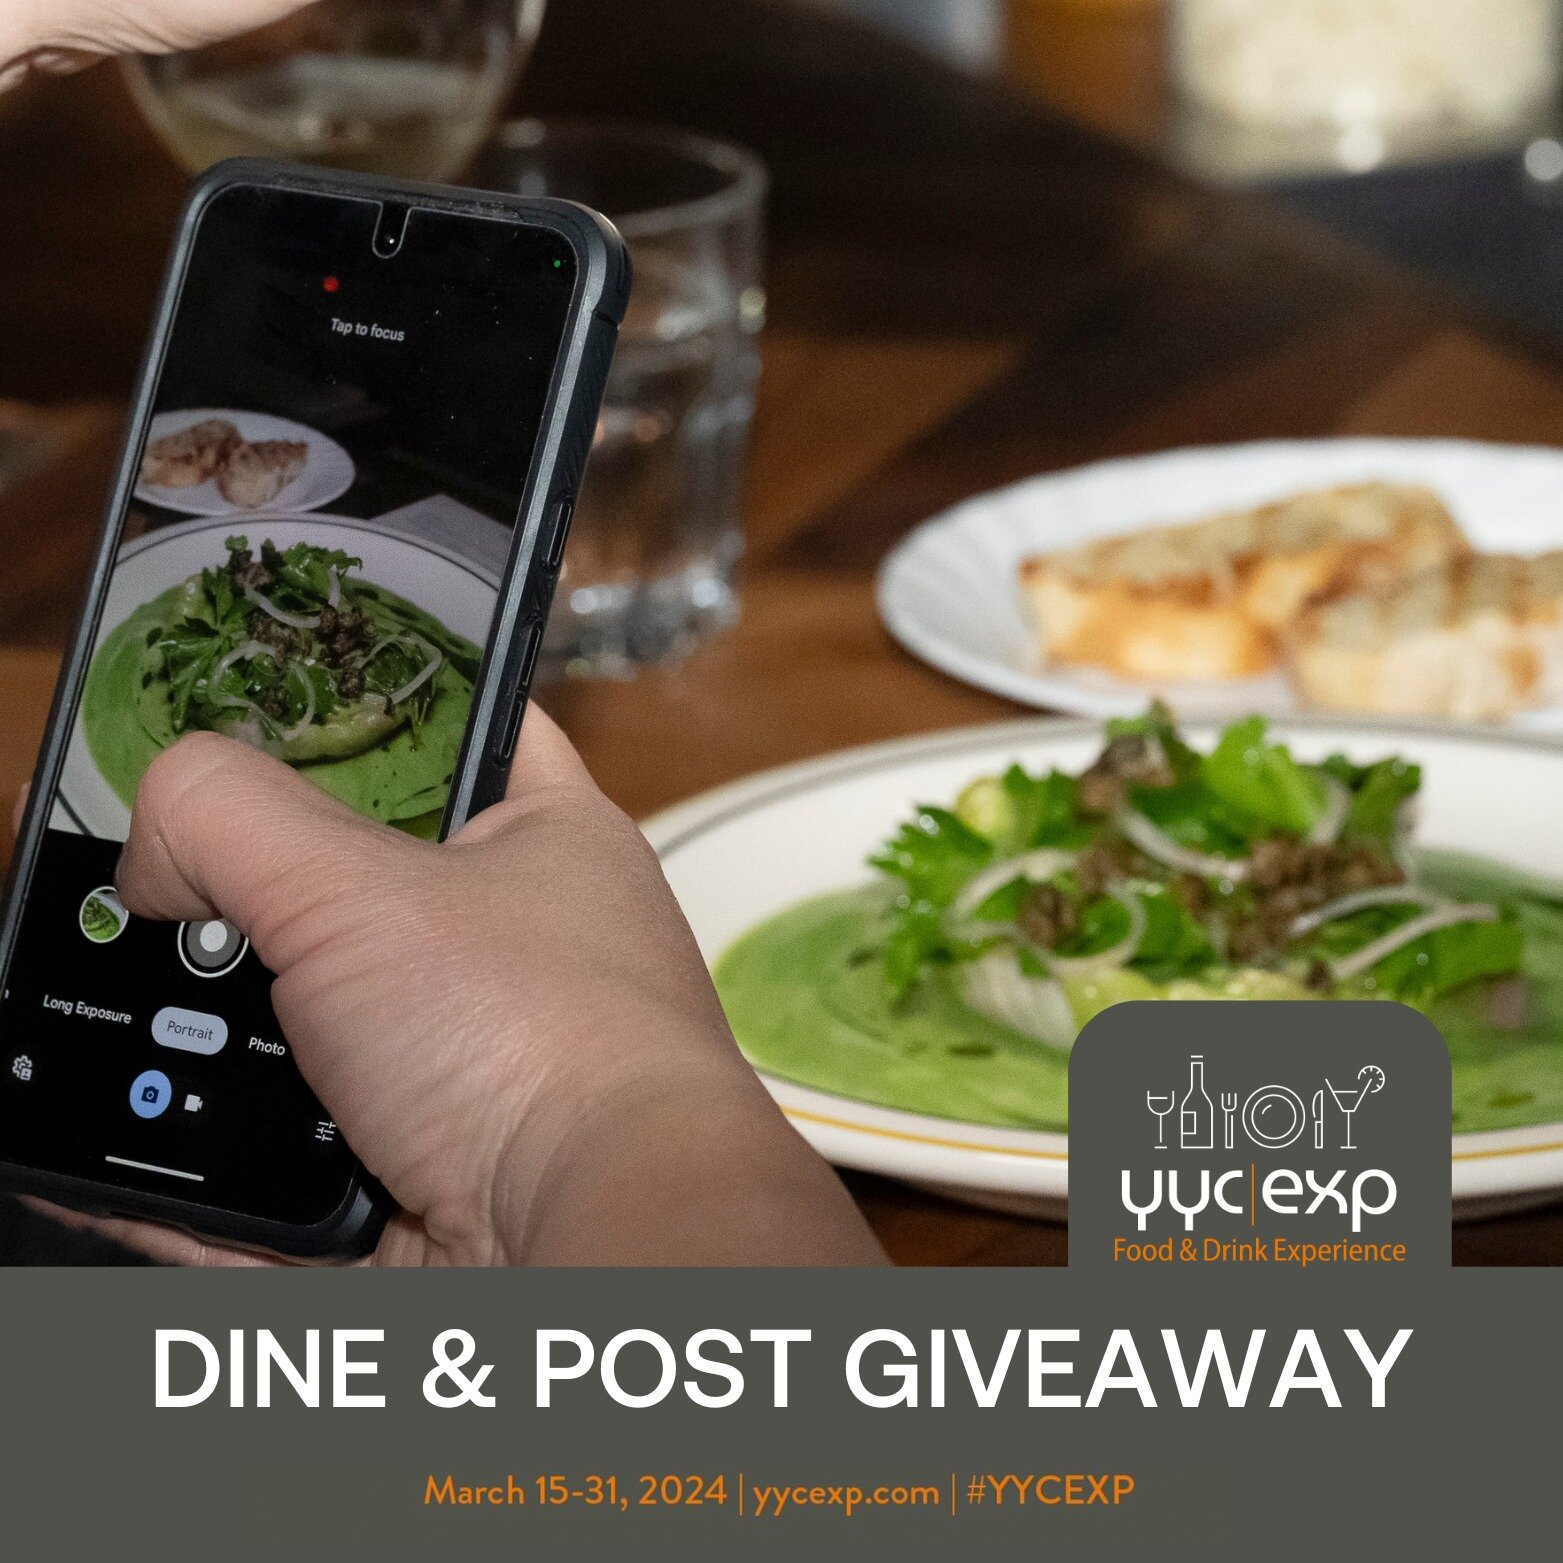 Reminder to post your favourite delicious food photos! Participate in the Dine &amp; Post Contest by posting a picture or video of your tasty meal at one of the 90 participating restaurants, tagging @foodanddrink.exp and using #yycexp! Both stories a